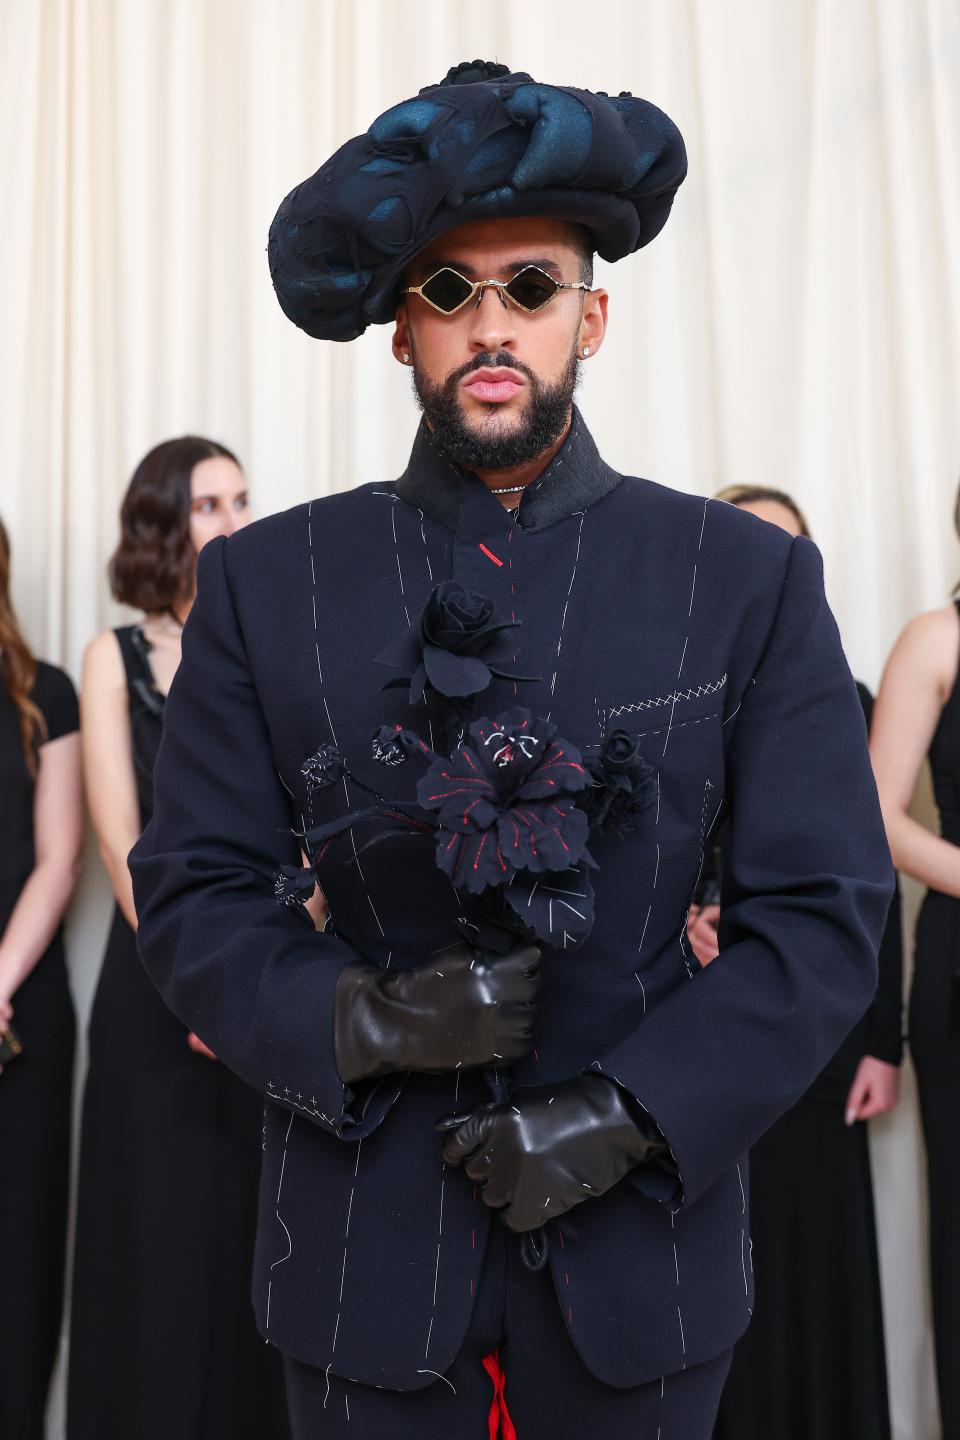 Bad Bunny in a unique hat and structured jacket with embellishments, standing confidently